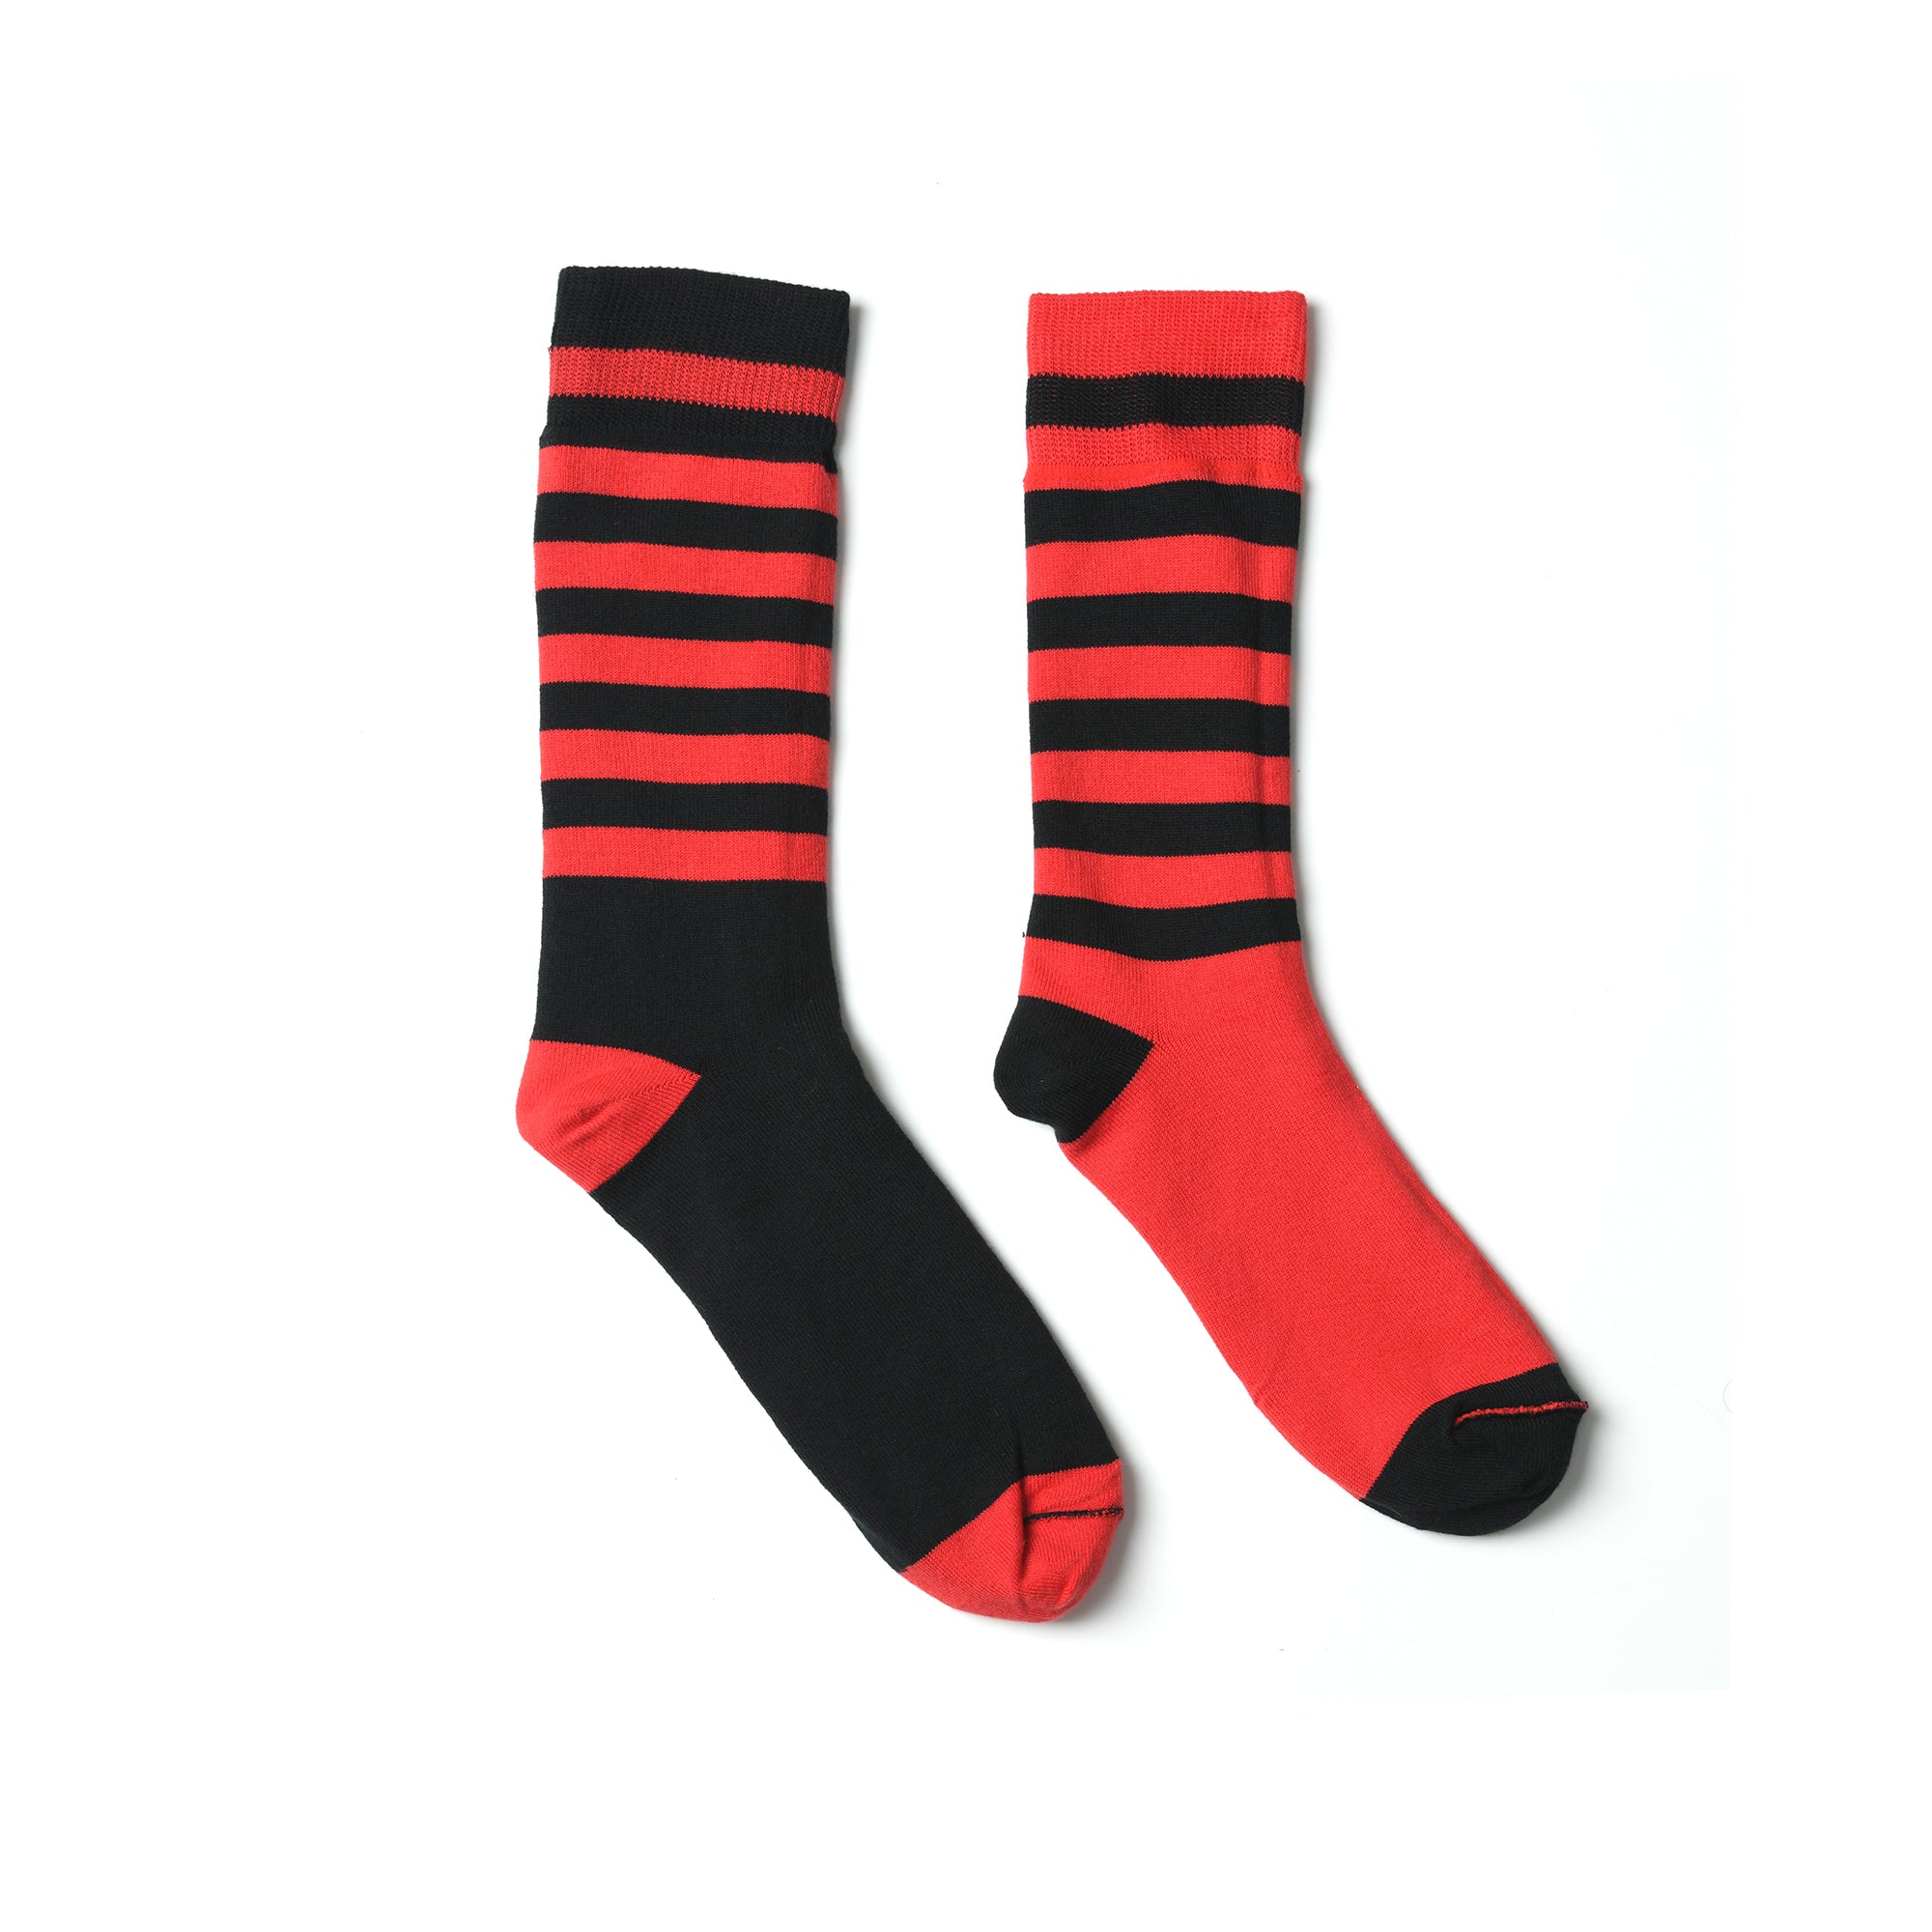 The Salvages x decka Reversible Mismatched Socks